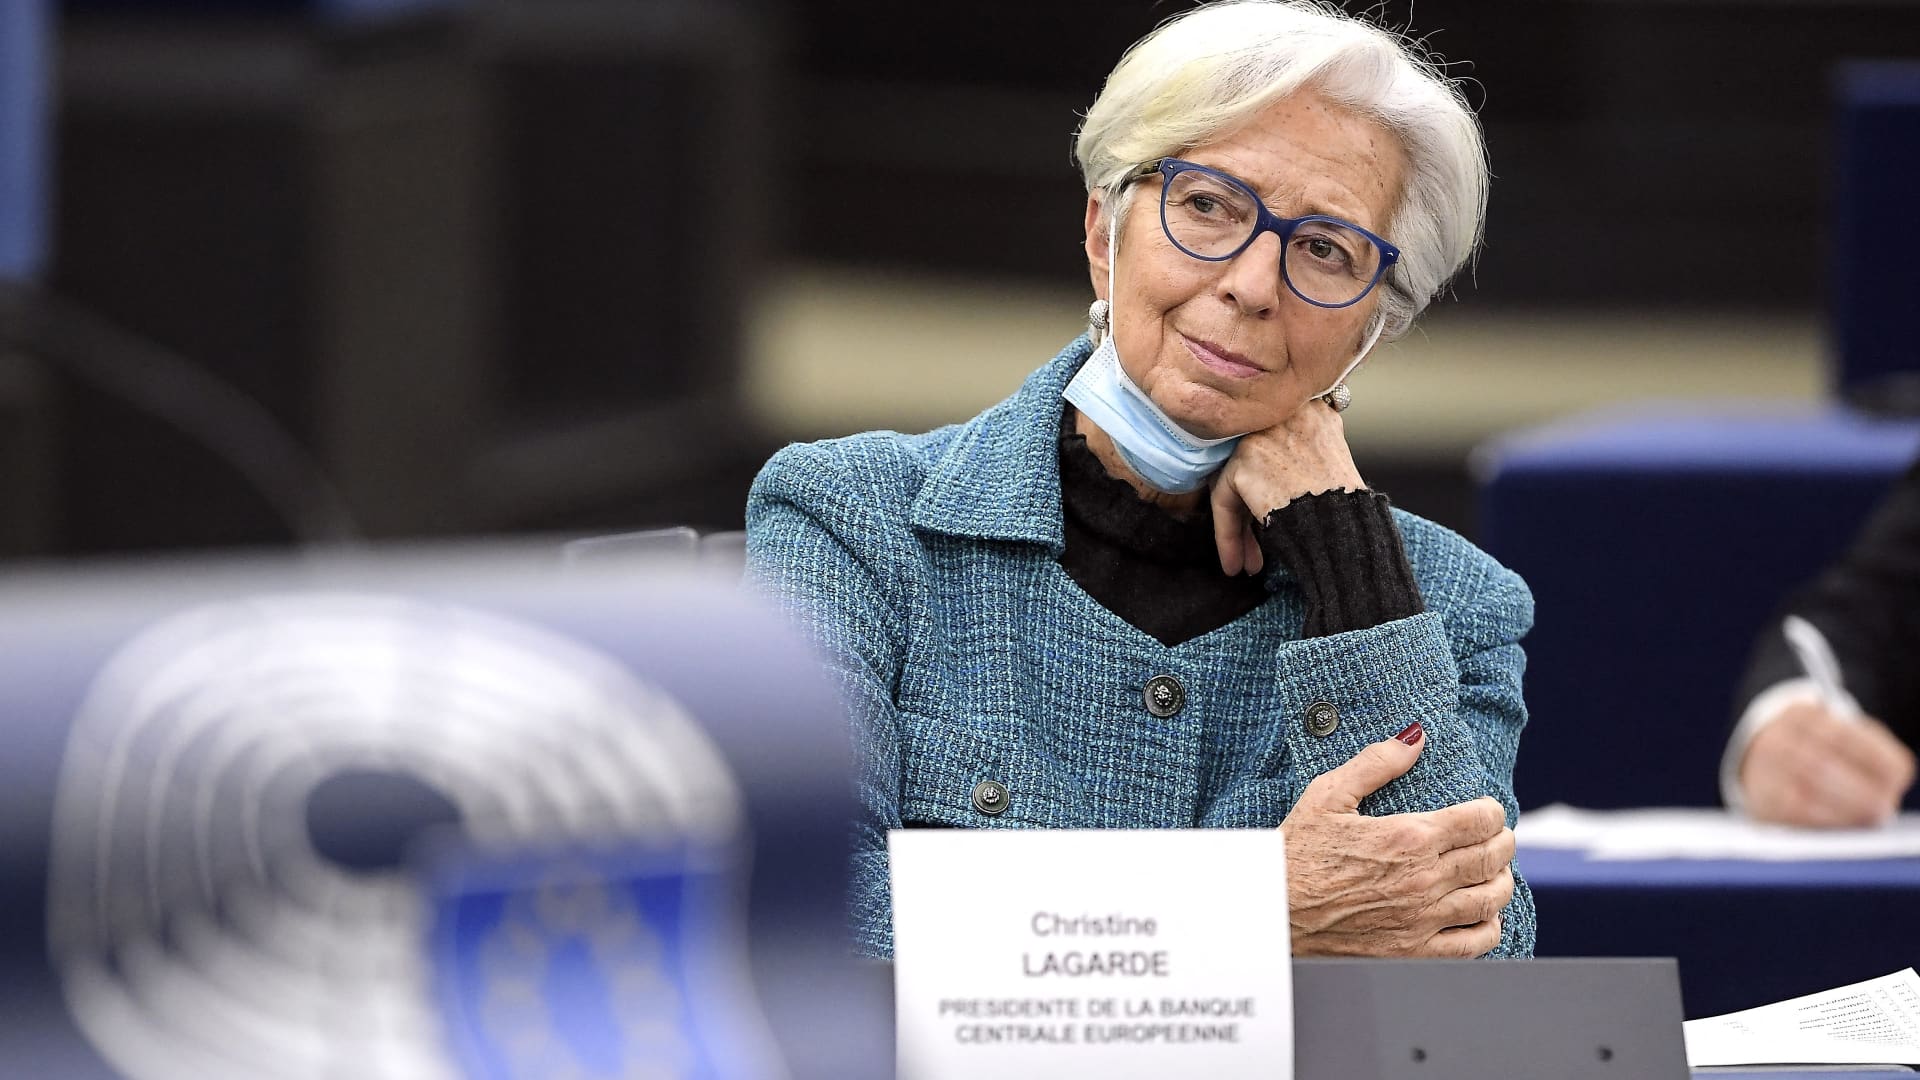 European Central Bank President Christine Lagarde attends a debate during a plenary session at the European Parliament on February 14, 2022 in Strasbourg, eastern France.